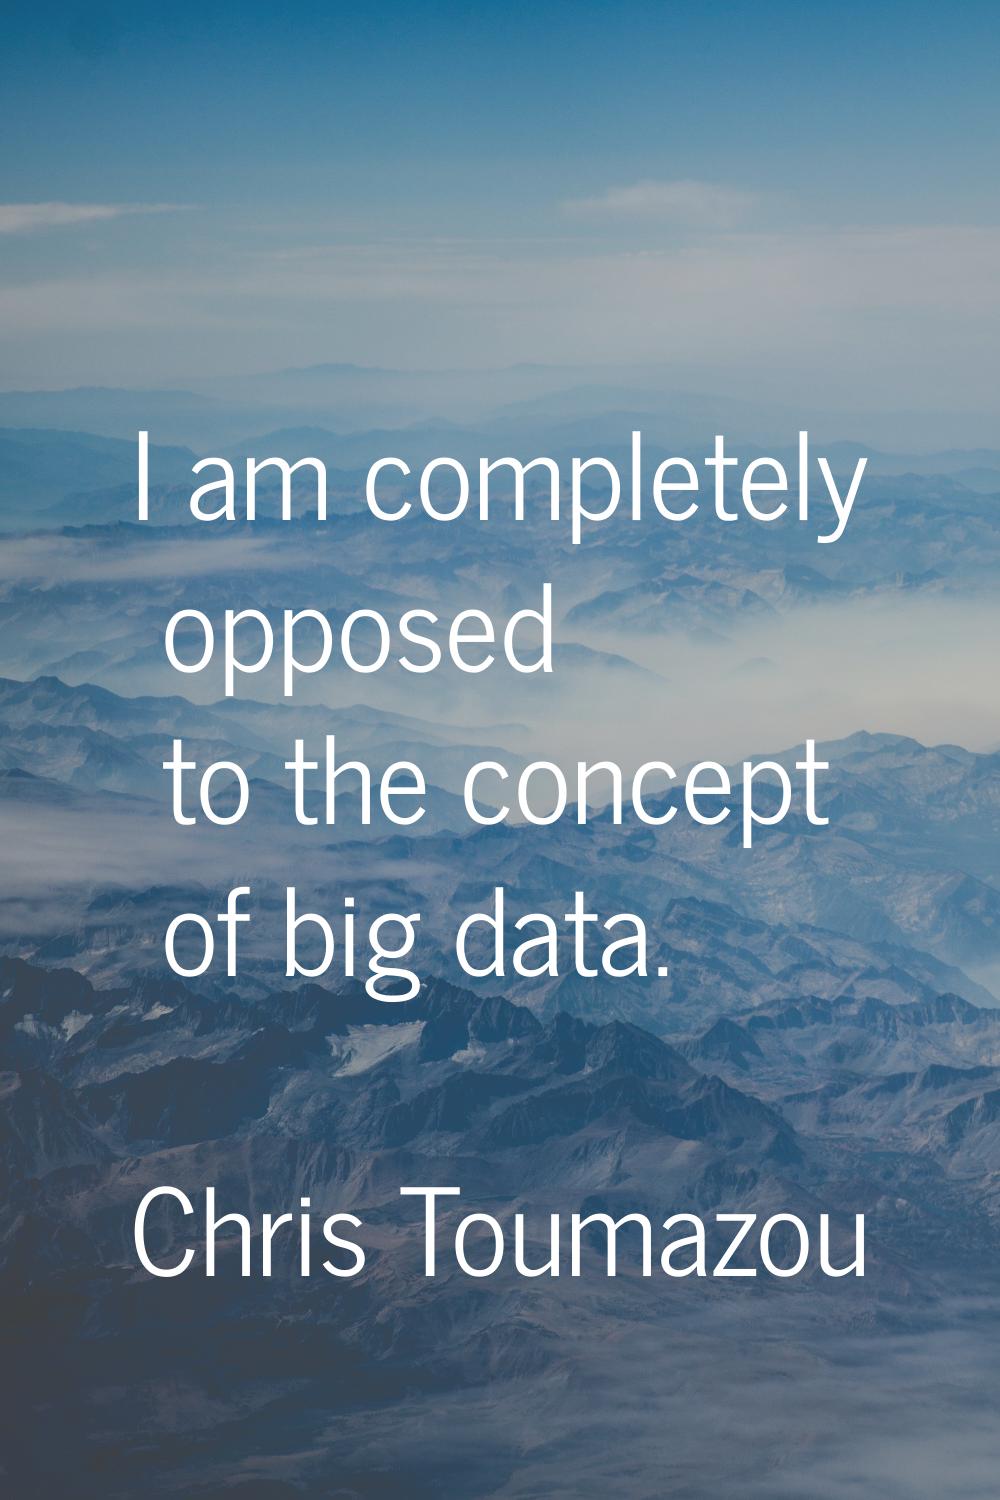 I am completely opposed to the concept of big data.